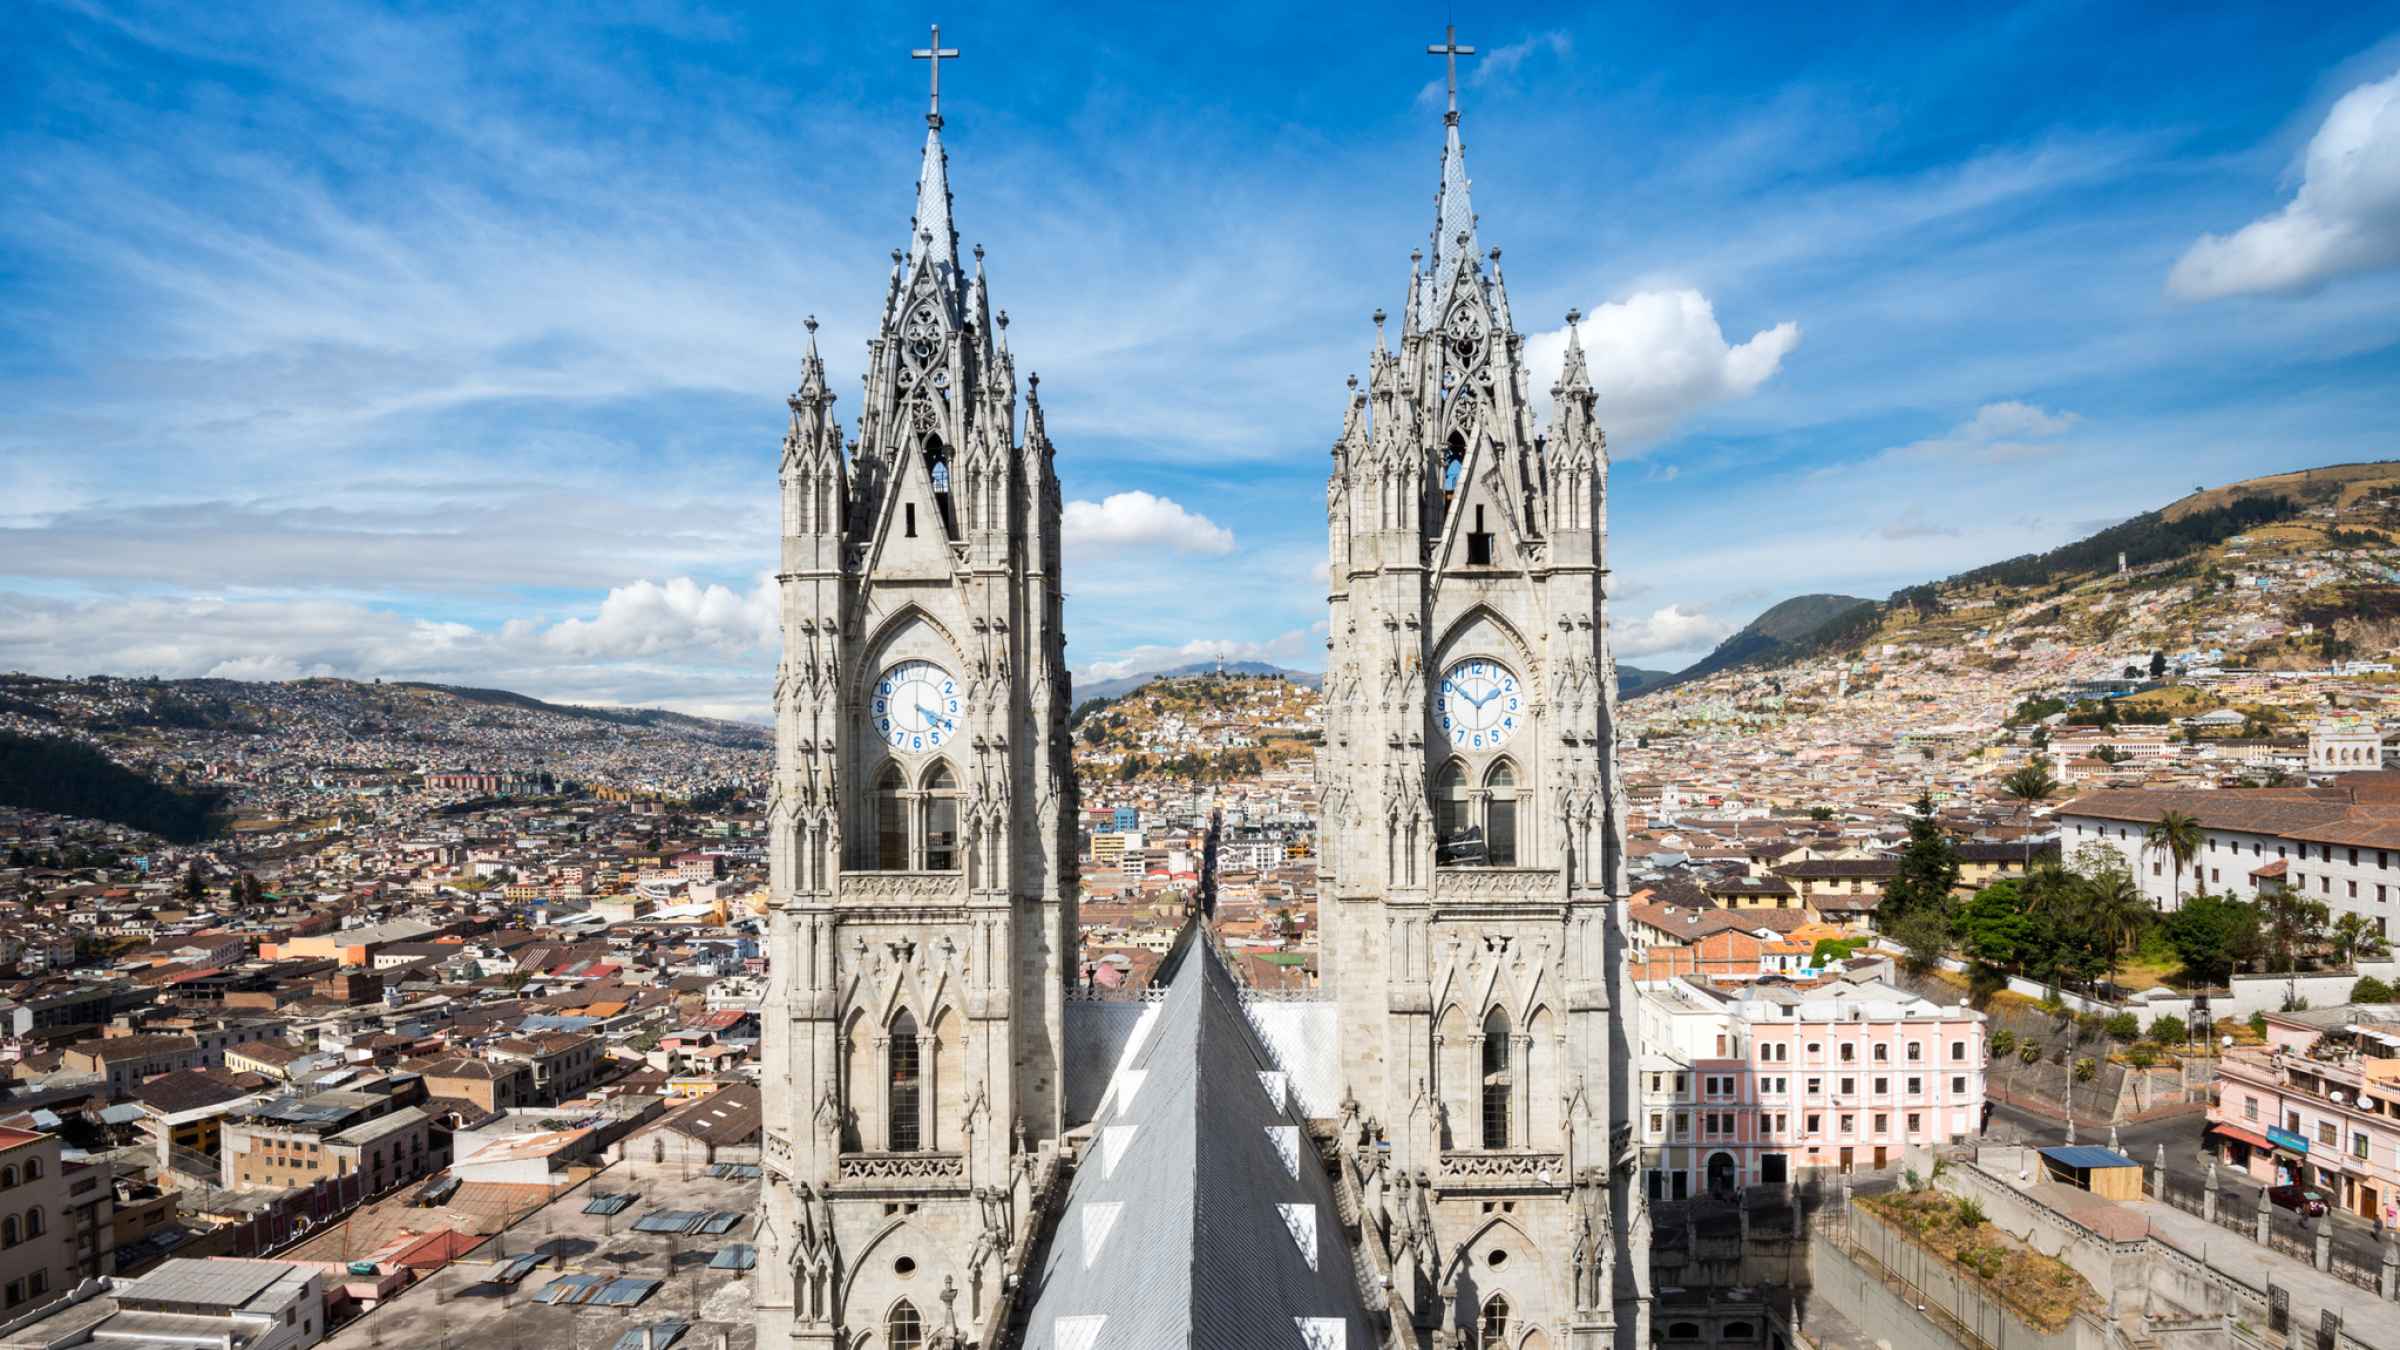 The BEST Quito Tours and Things to Do in 2022 - FREE Cancellation